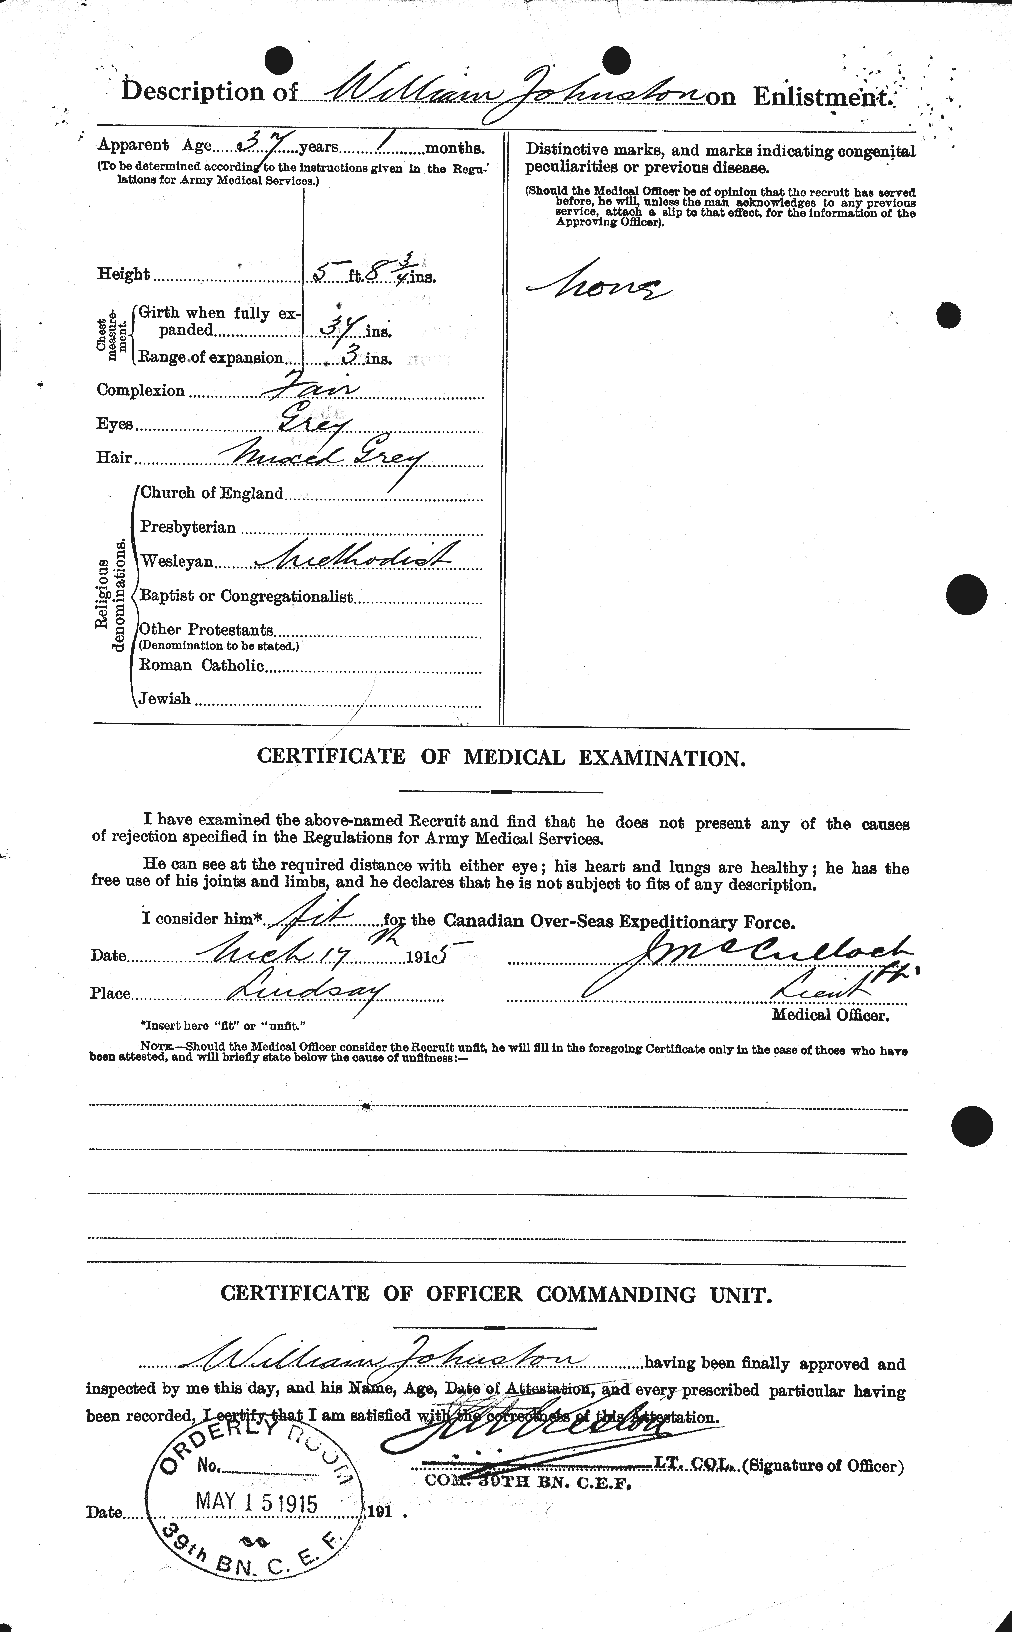 Personnel Records of the First World War - CEF 427248b